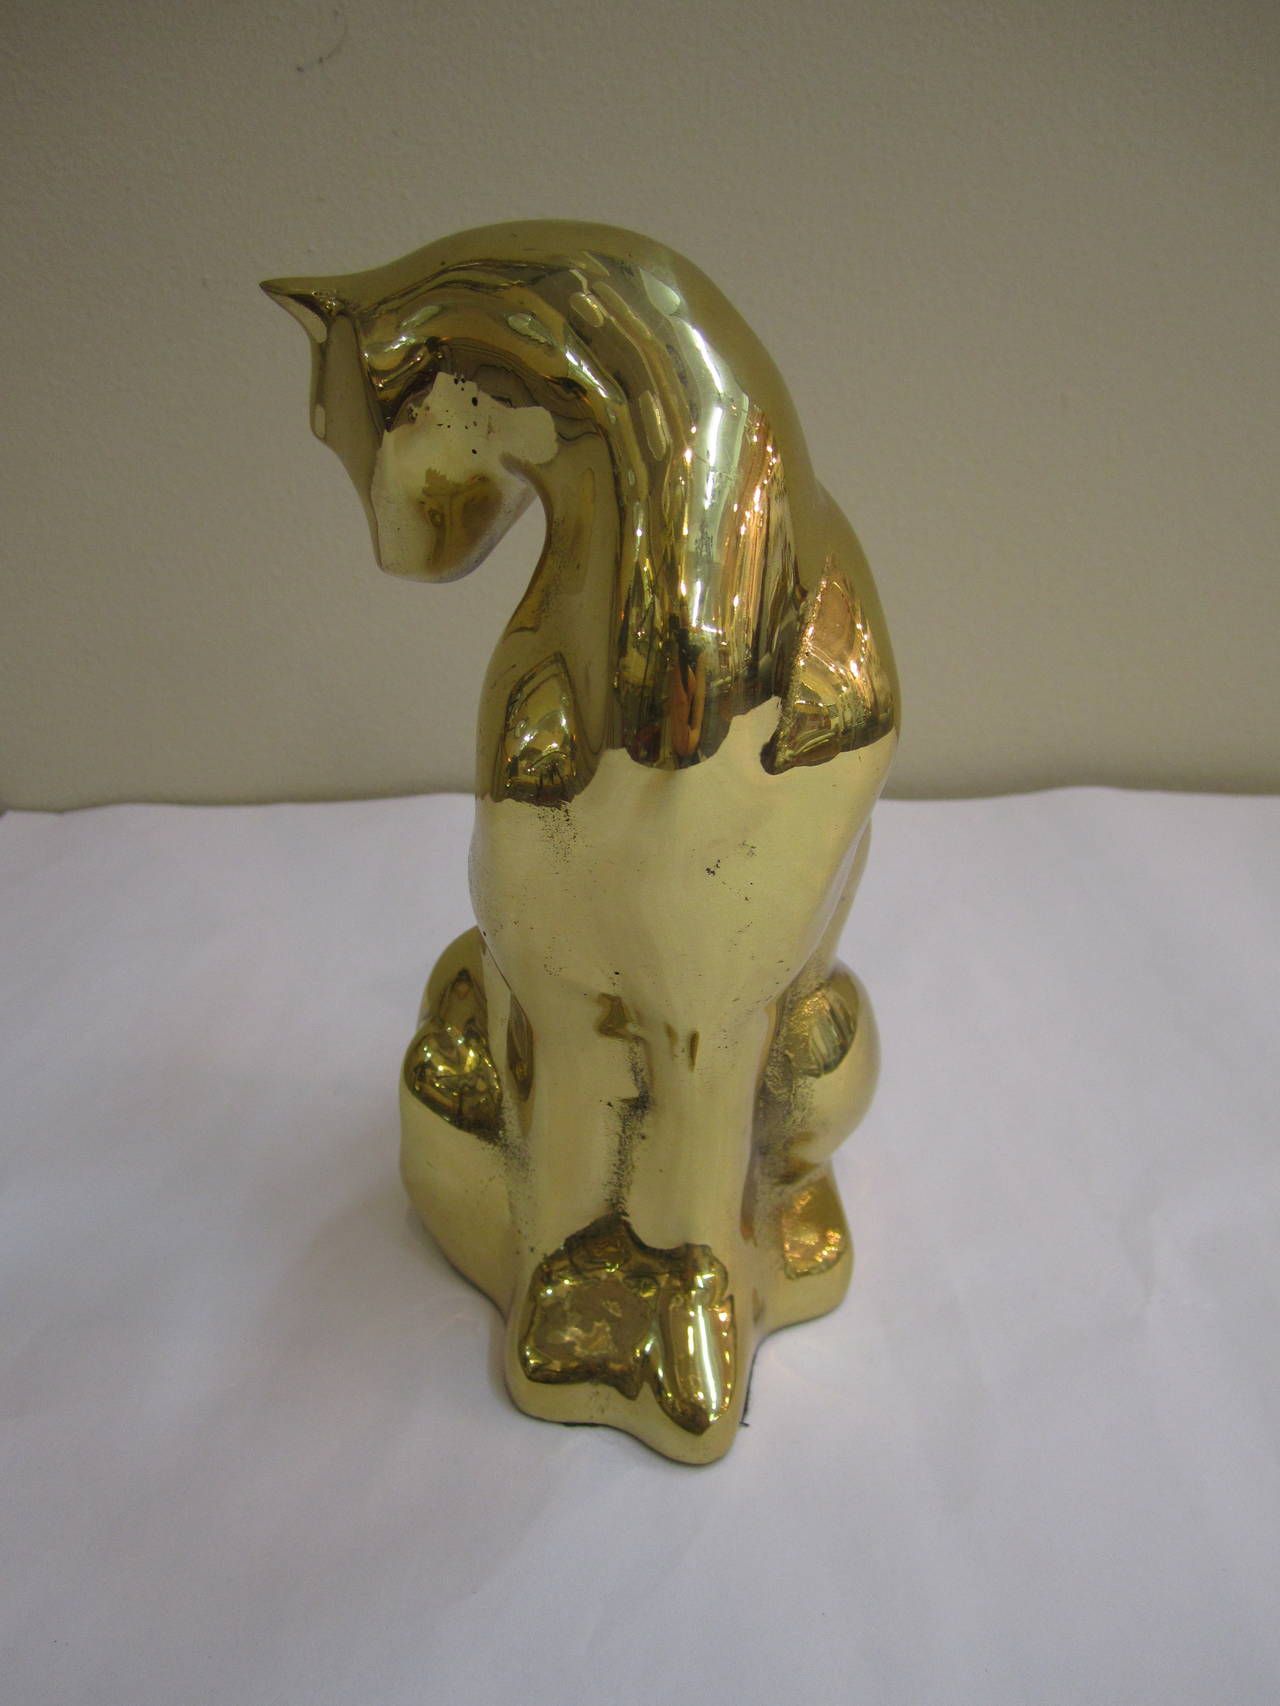 Polished Modern Brass Cheetah or Panther Cat Sculpture in the Style of Cartier, 1970s